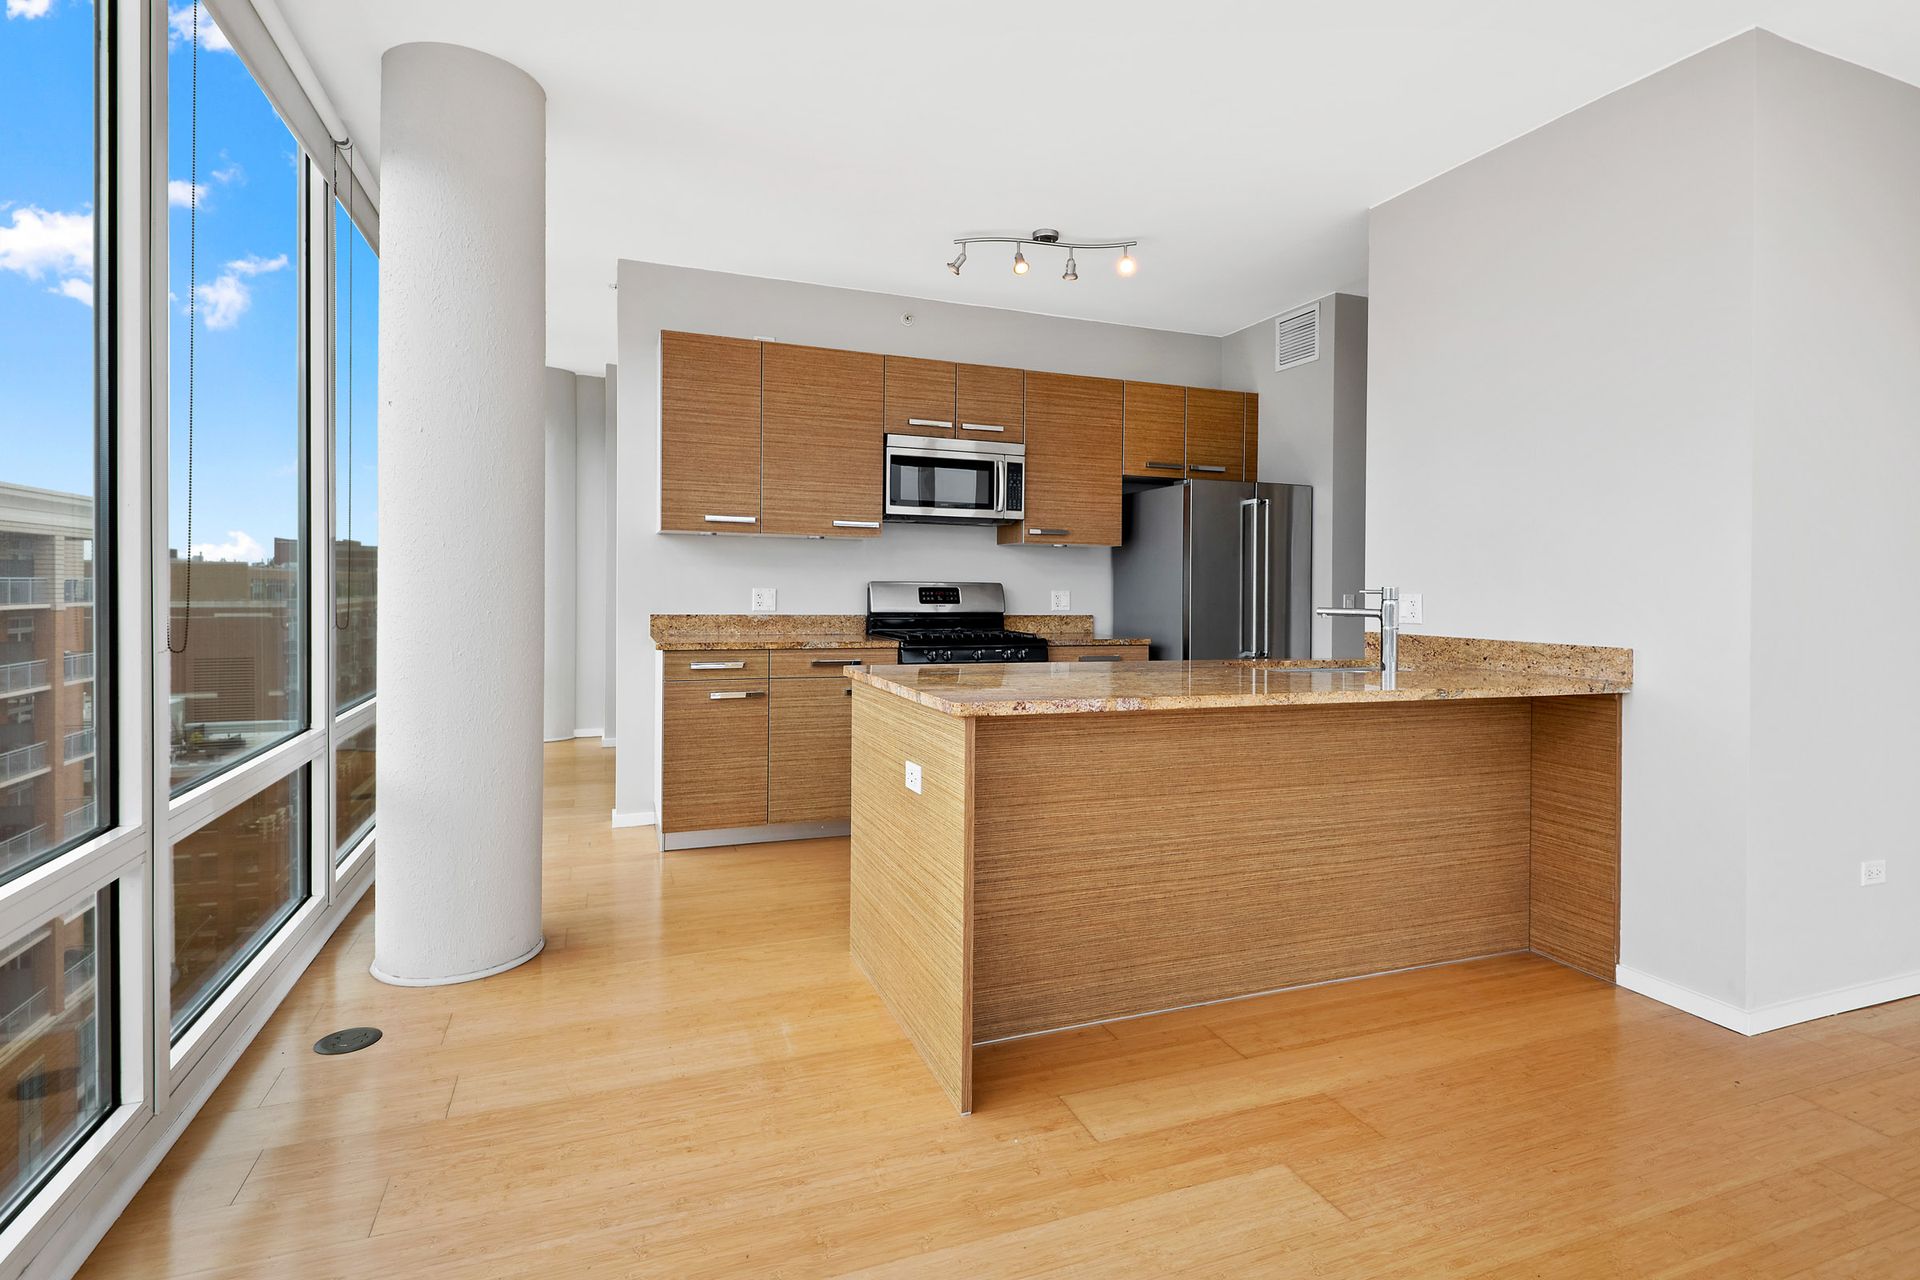 An empty kitchen with wooden cabinets and stainless steel appliances at 24 S Morgan Apartments.